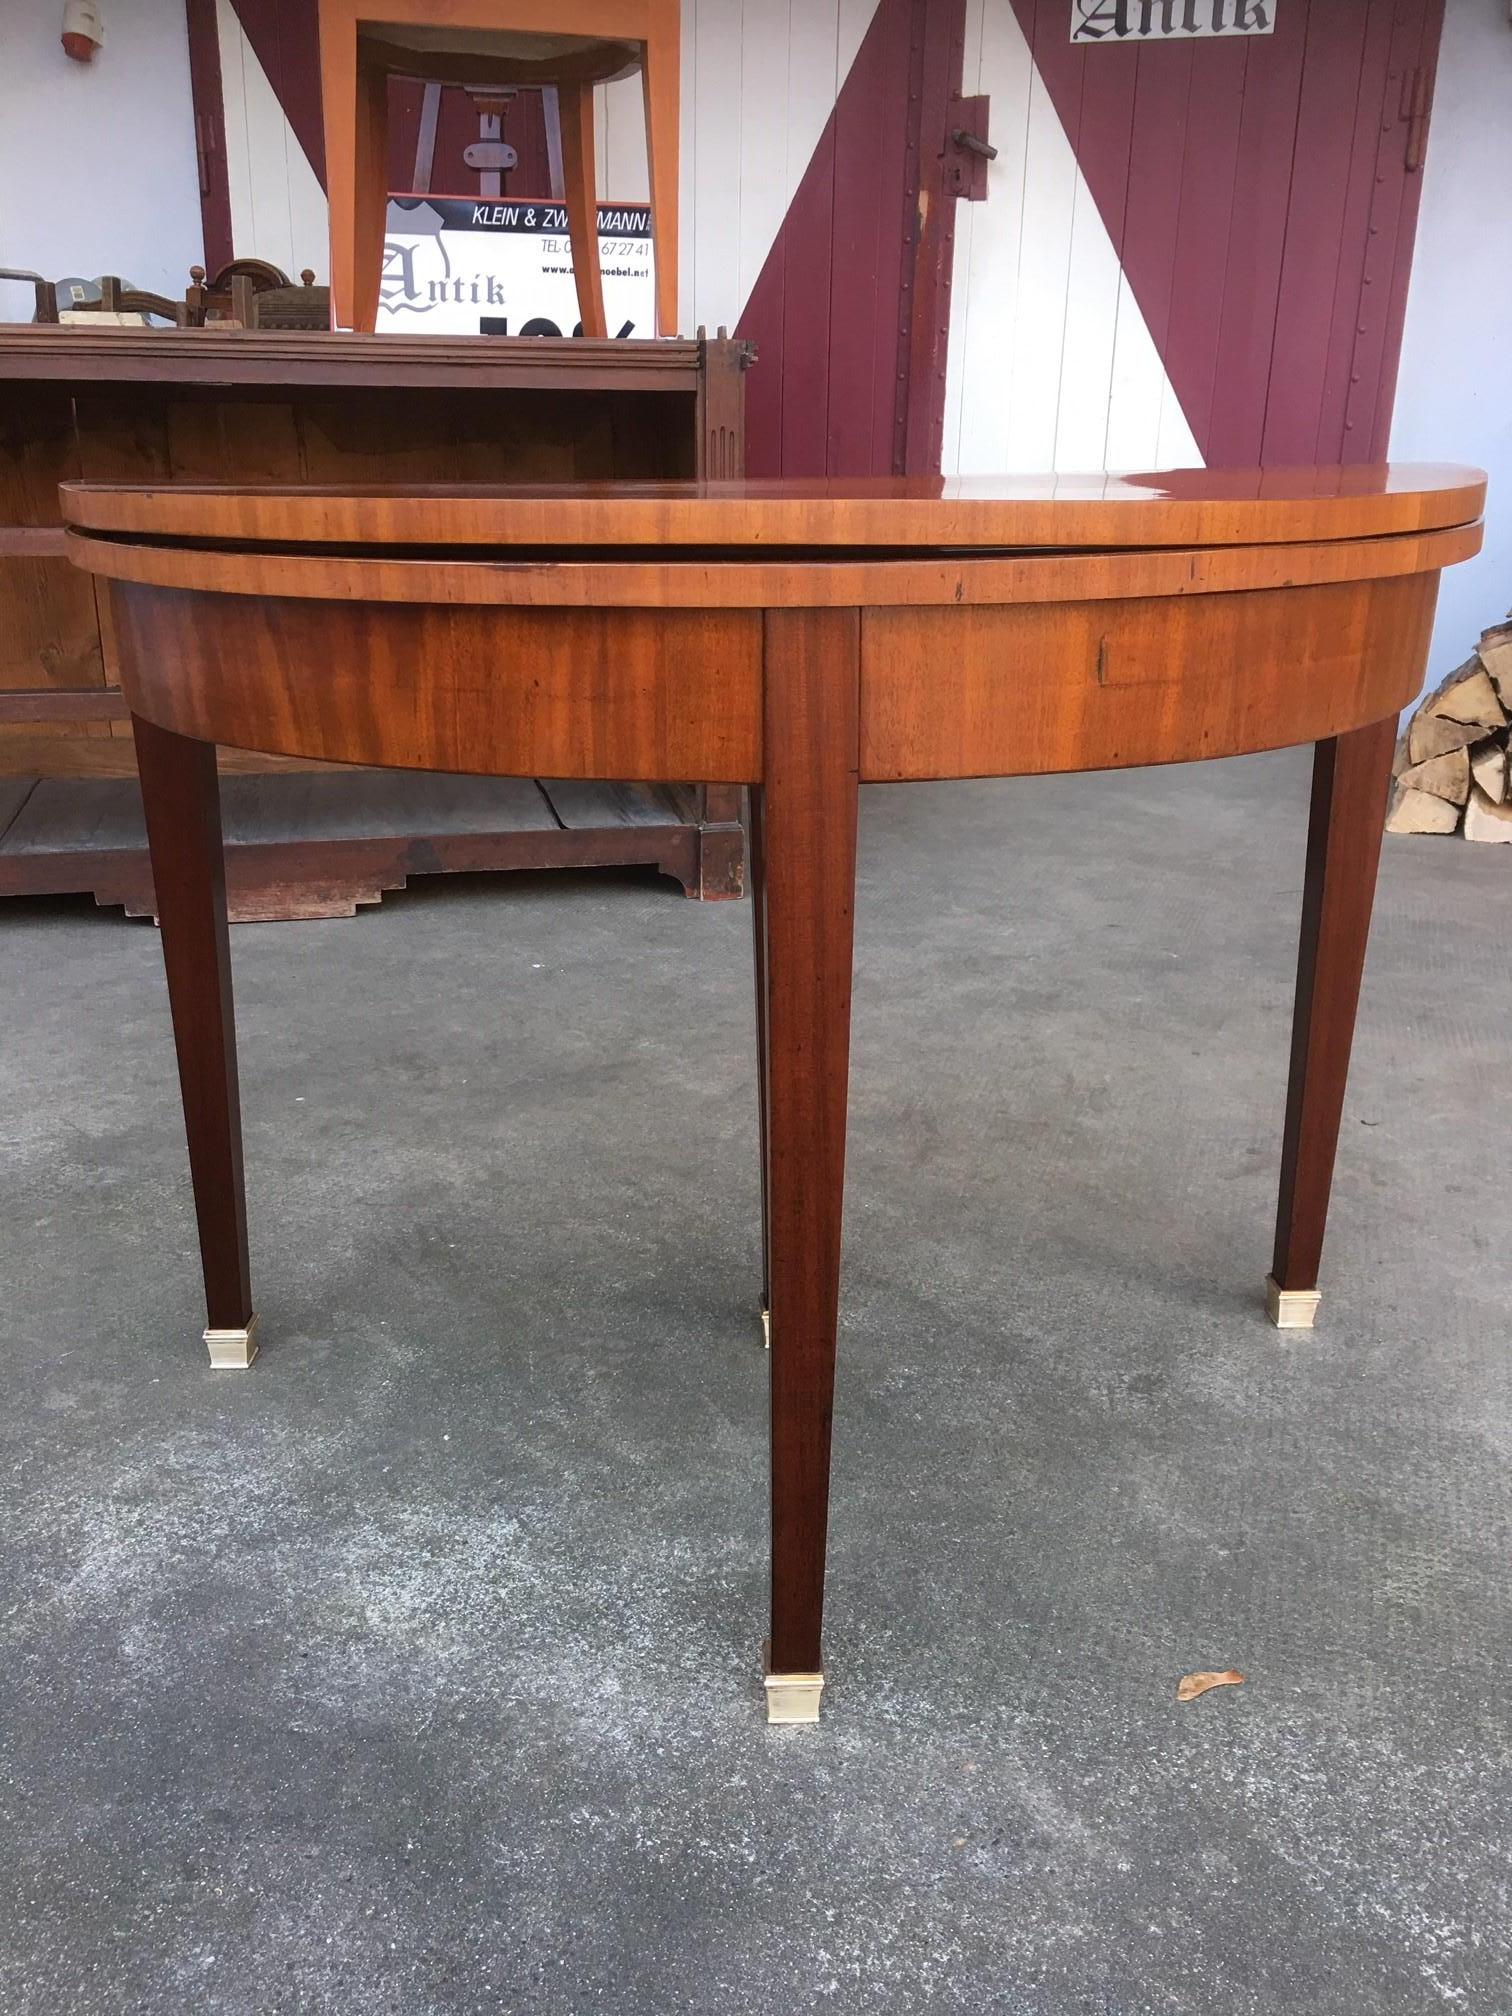 This is an Empire salon table with beautiful inlays and finest brass applications. The palisander and walnut precious woods were hand polished with shellac and brought to high gloss. This piece shines with a very unique pattern and decorations that